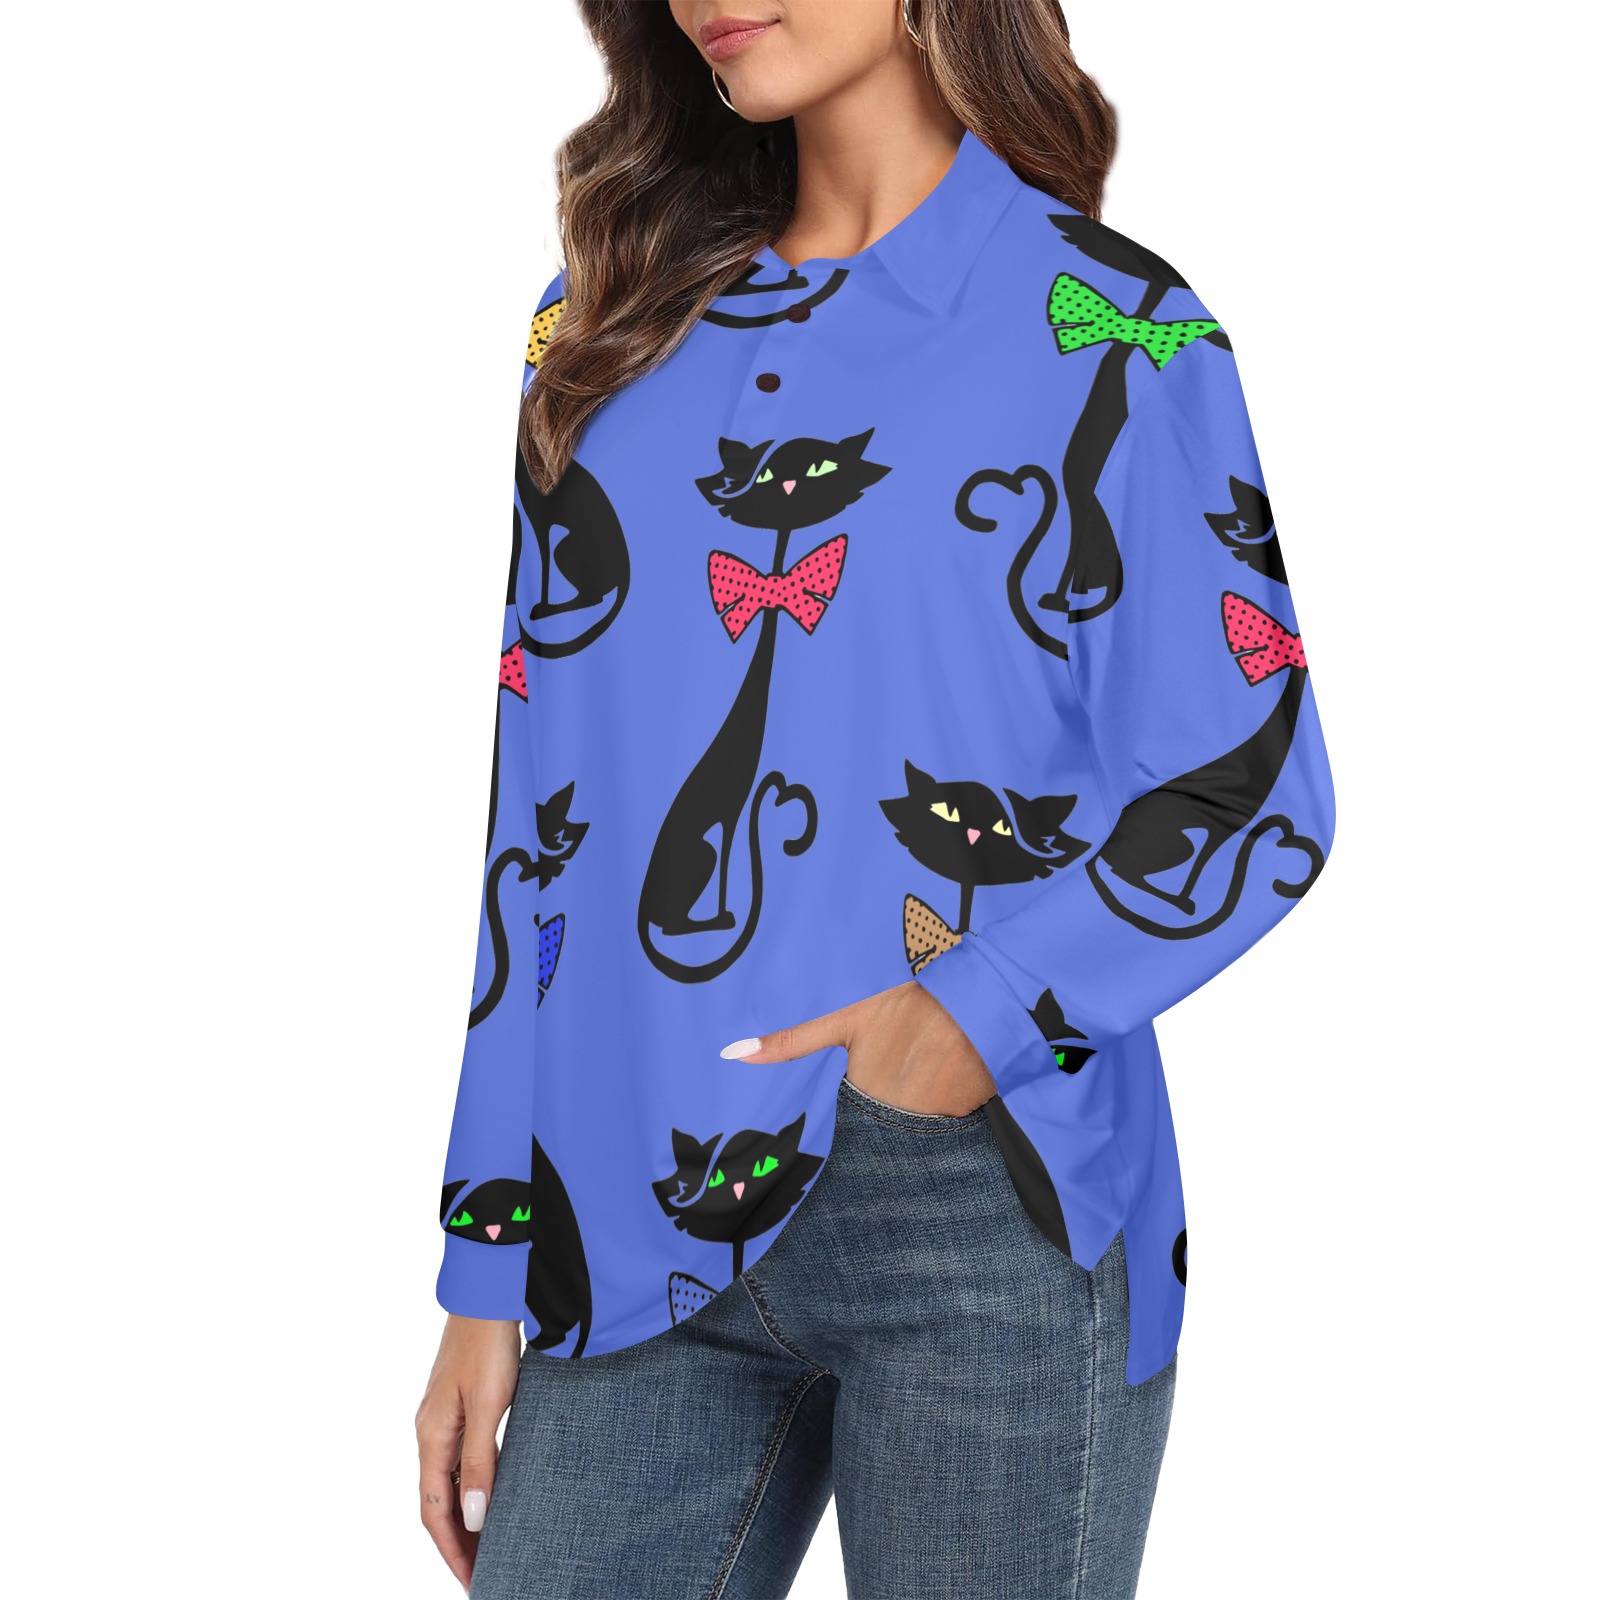 Black Cat with Bow Ties / Blue Women's Long Sleeve Polo Shirt (Model T73)